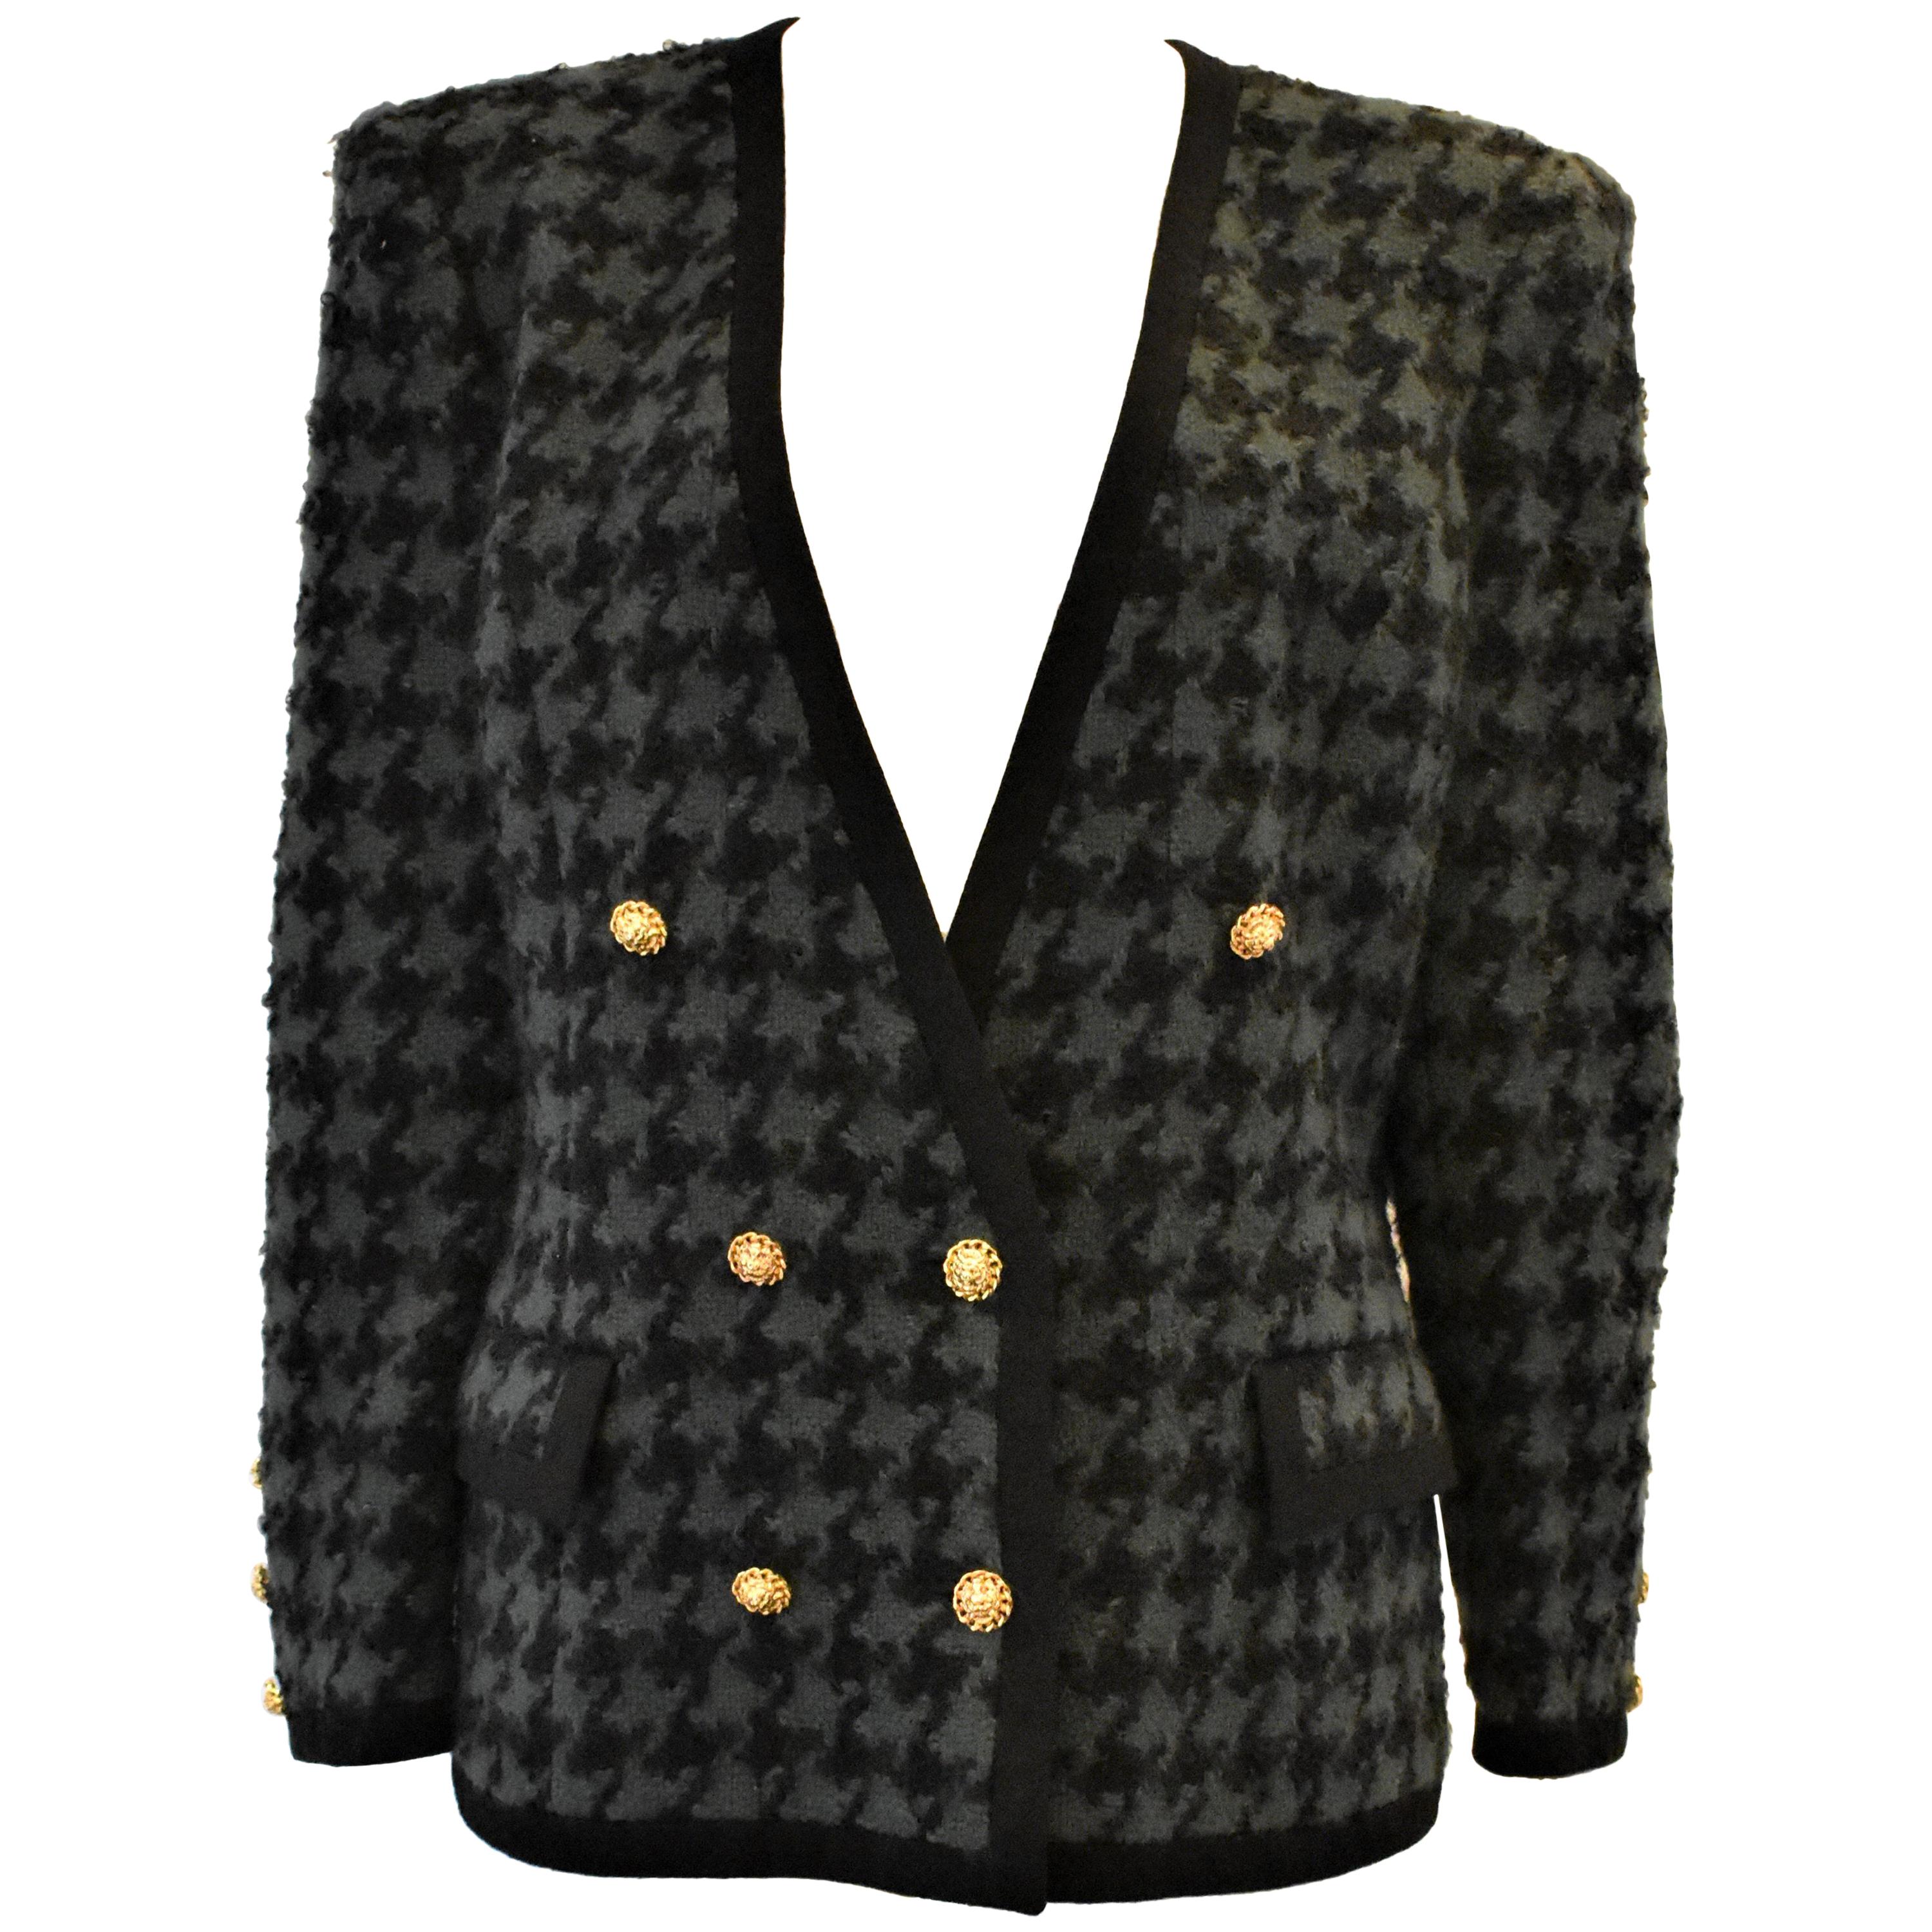 Vintage Richard Carrière Houndstooth Boucle Jacket, Chanel Style circa 1980 For Sale